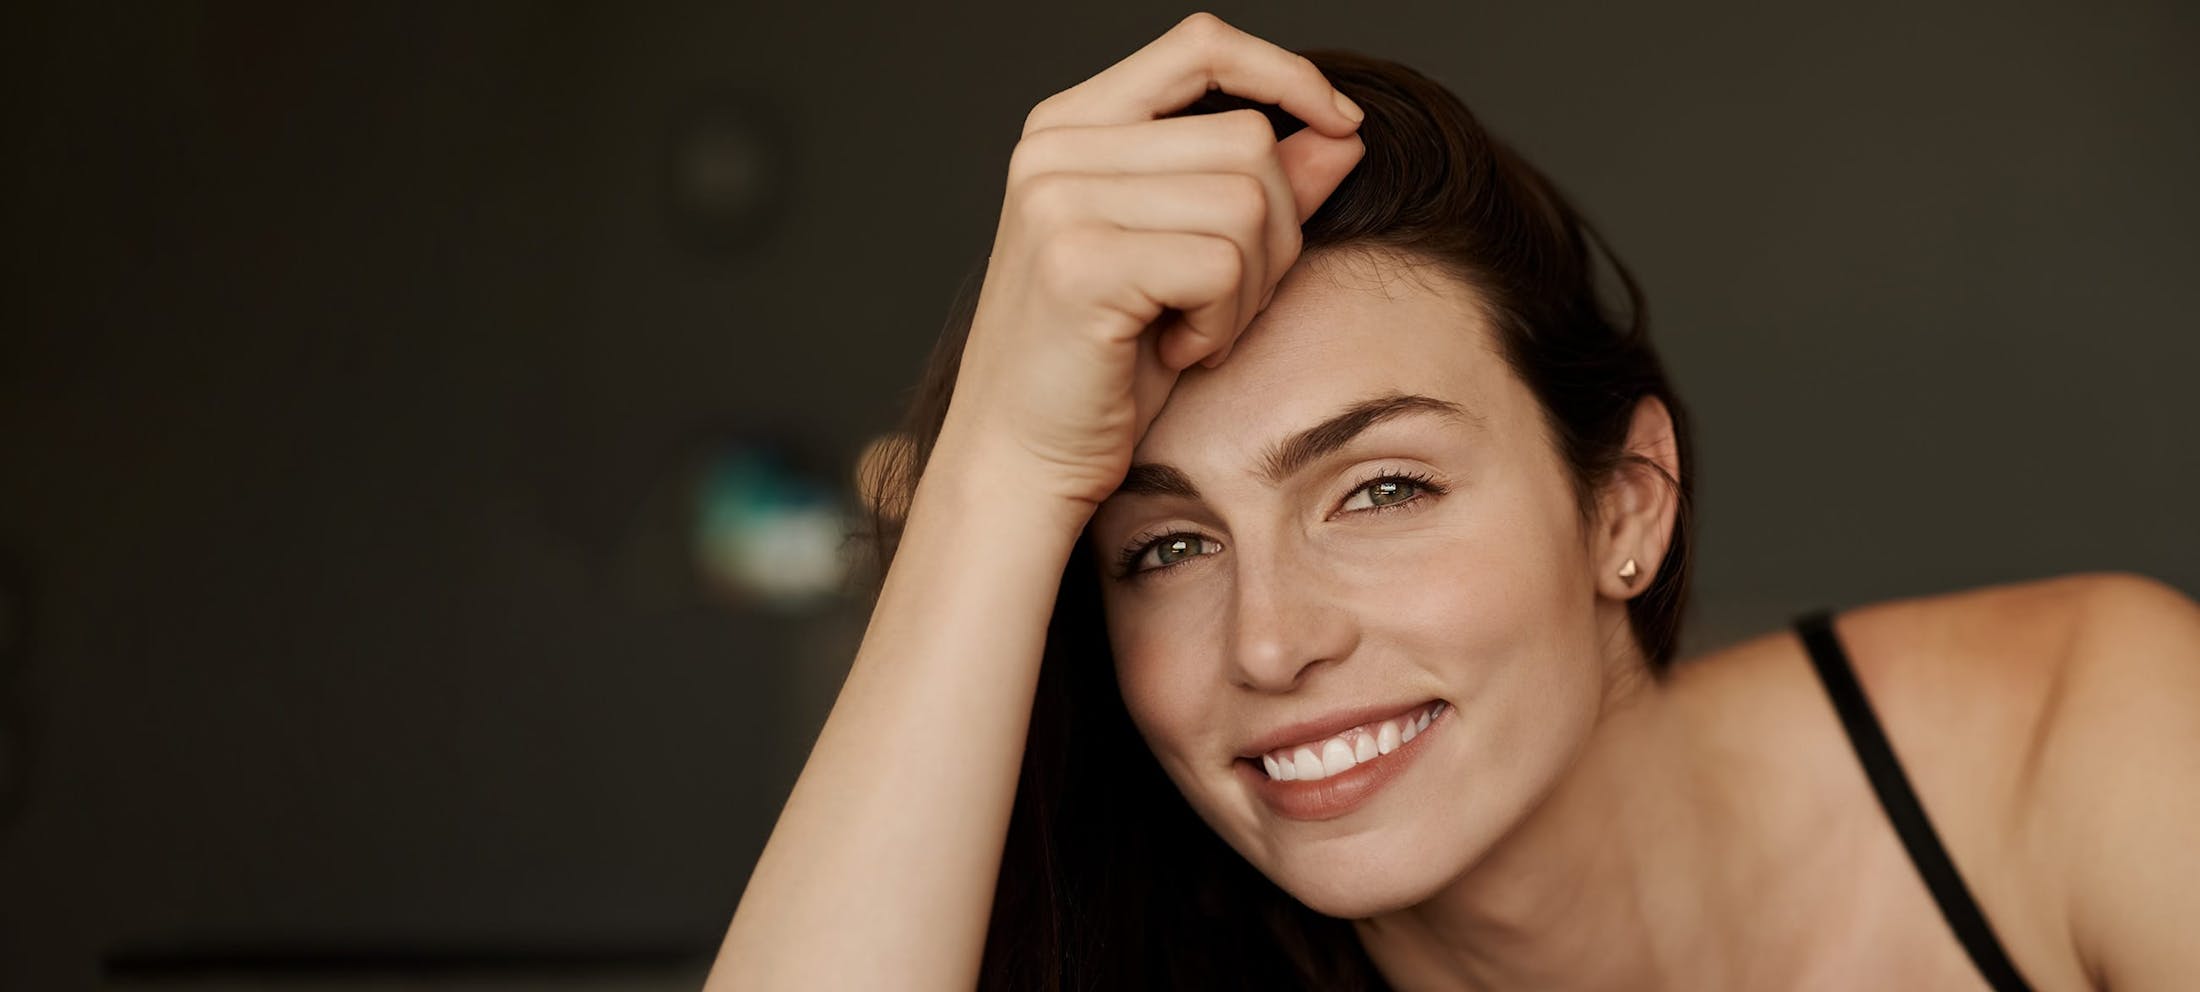 Woman smiling with her arm rested against her face